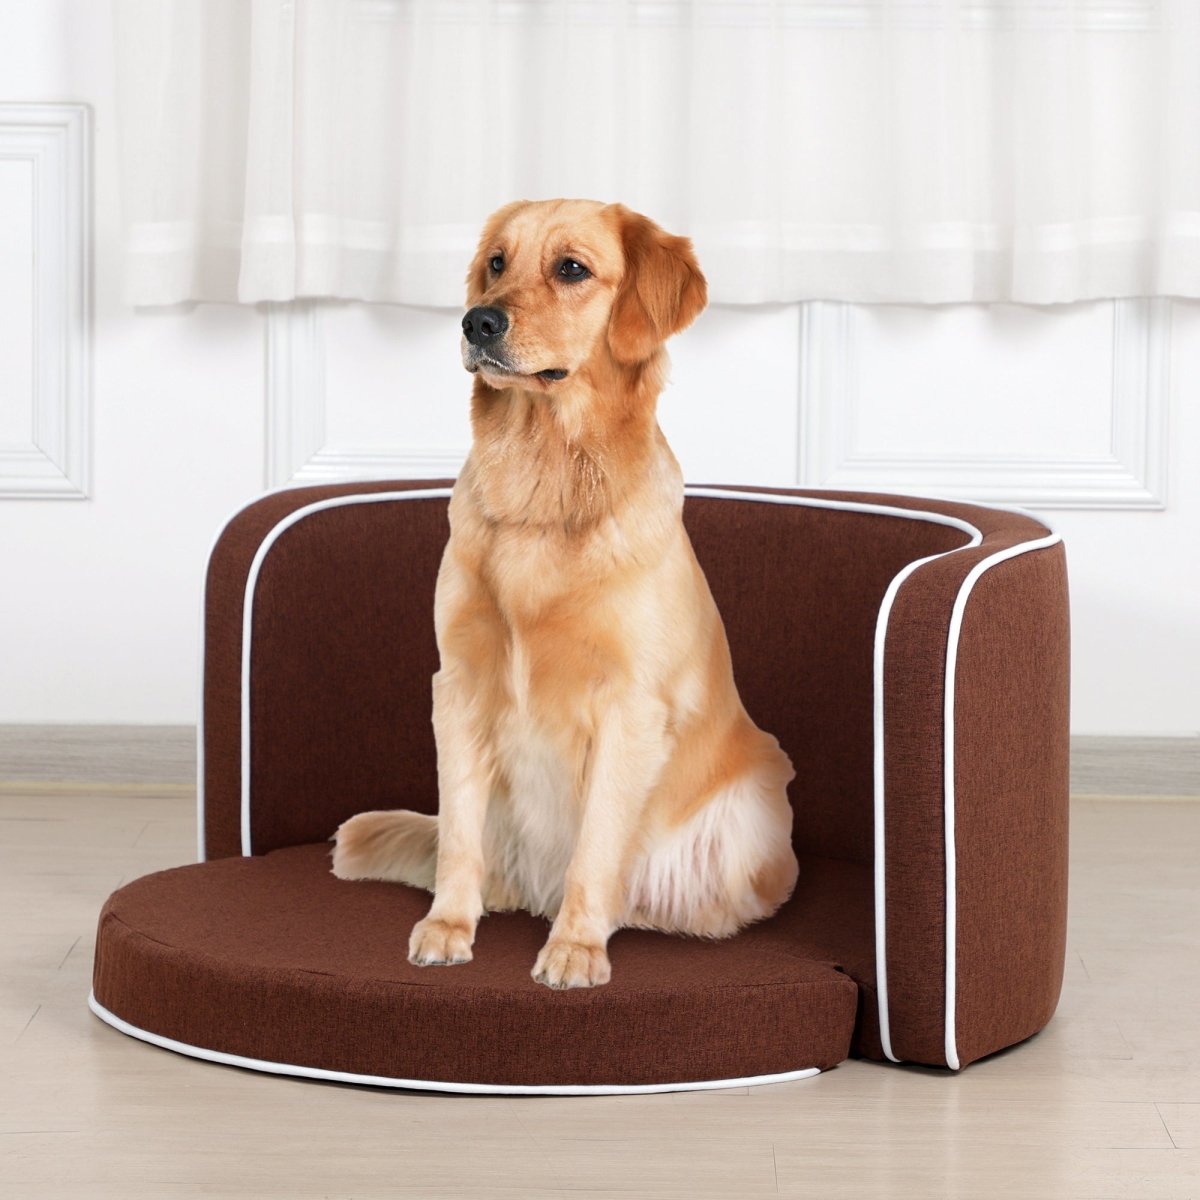 35" Brown Pet Sofa with Wooden Structure and Linen Goods White Roller Lines on the Edges Curved Appearance pet Sofa with Cushion